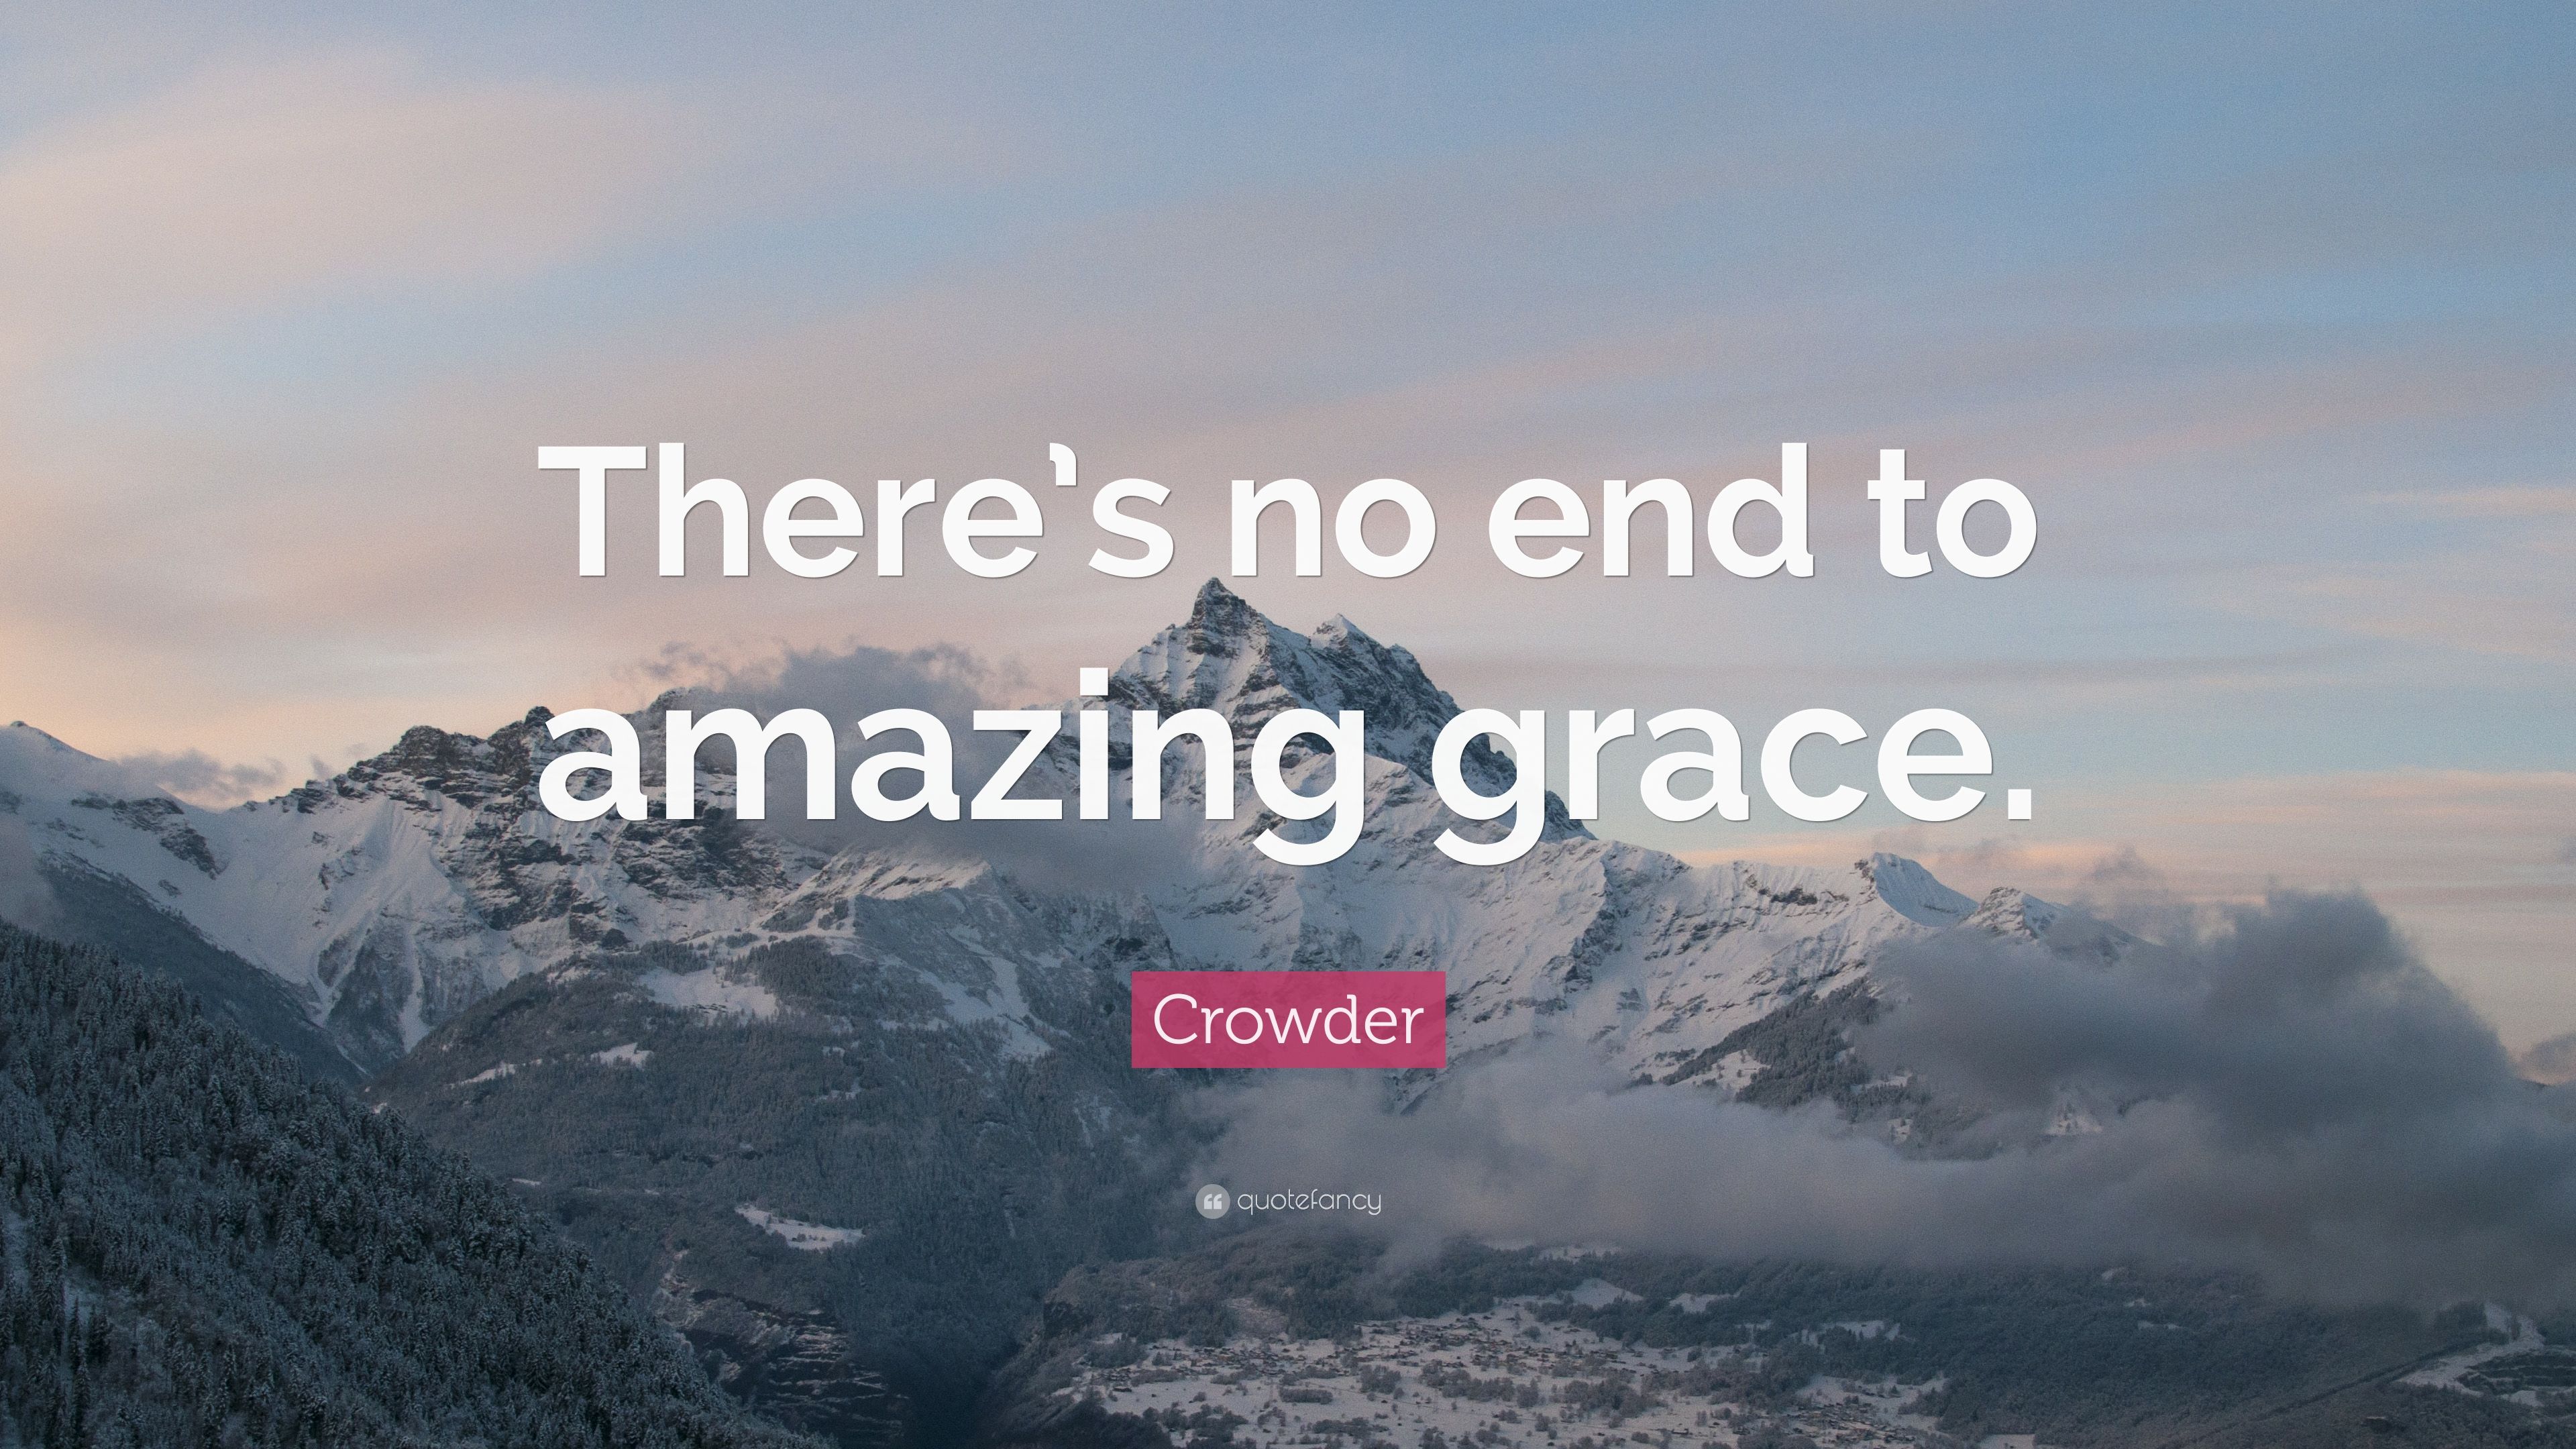 Crowder Quote: “There's no end to amazing grace.”